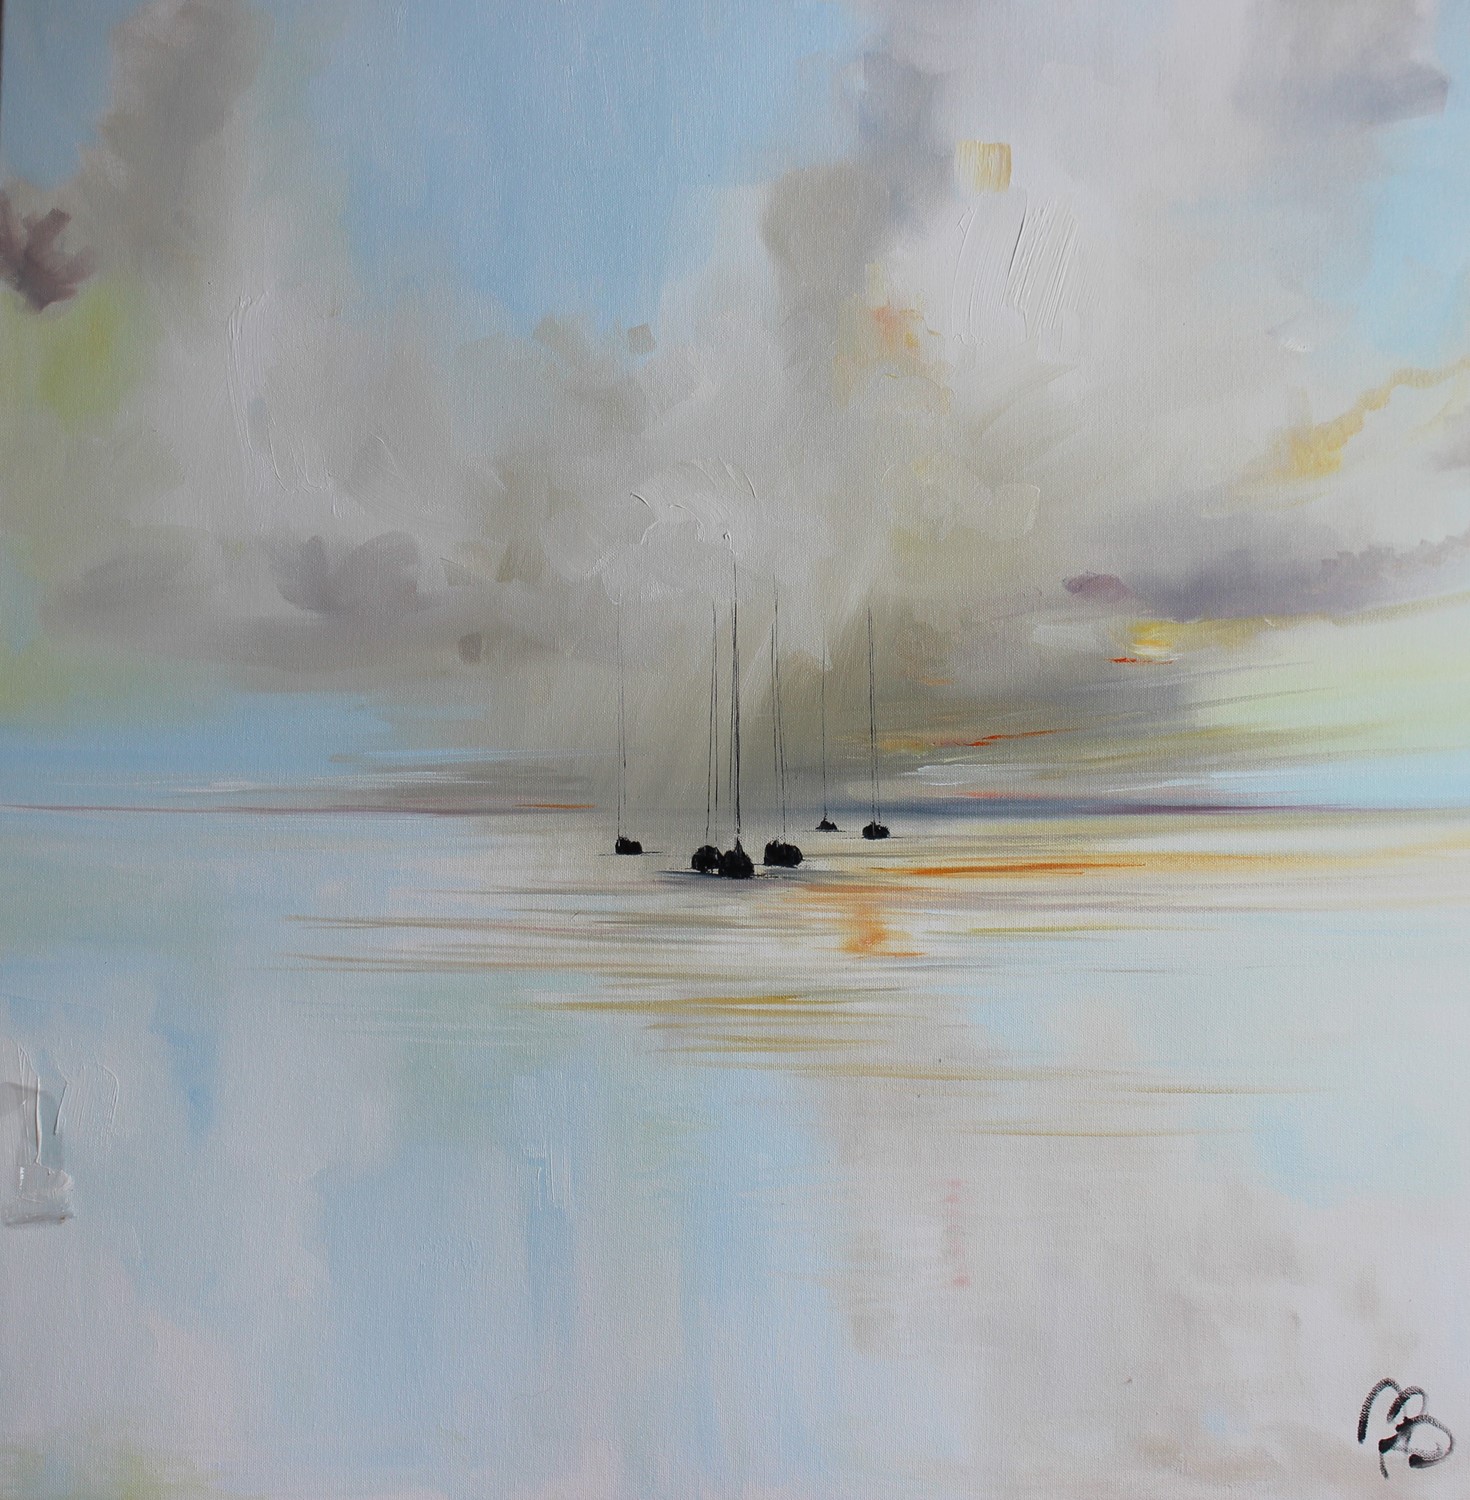 'Shifting clouds at sea' by artist Rosanne Barr